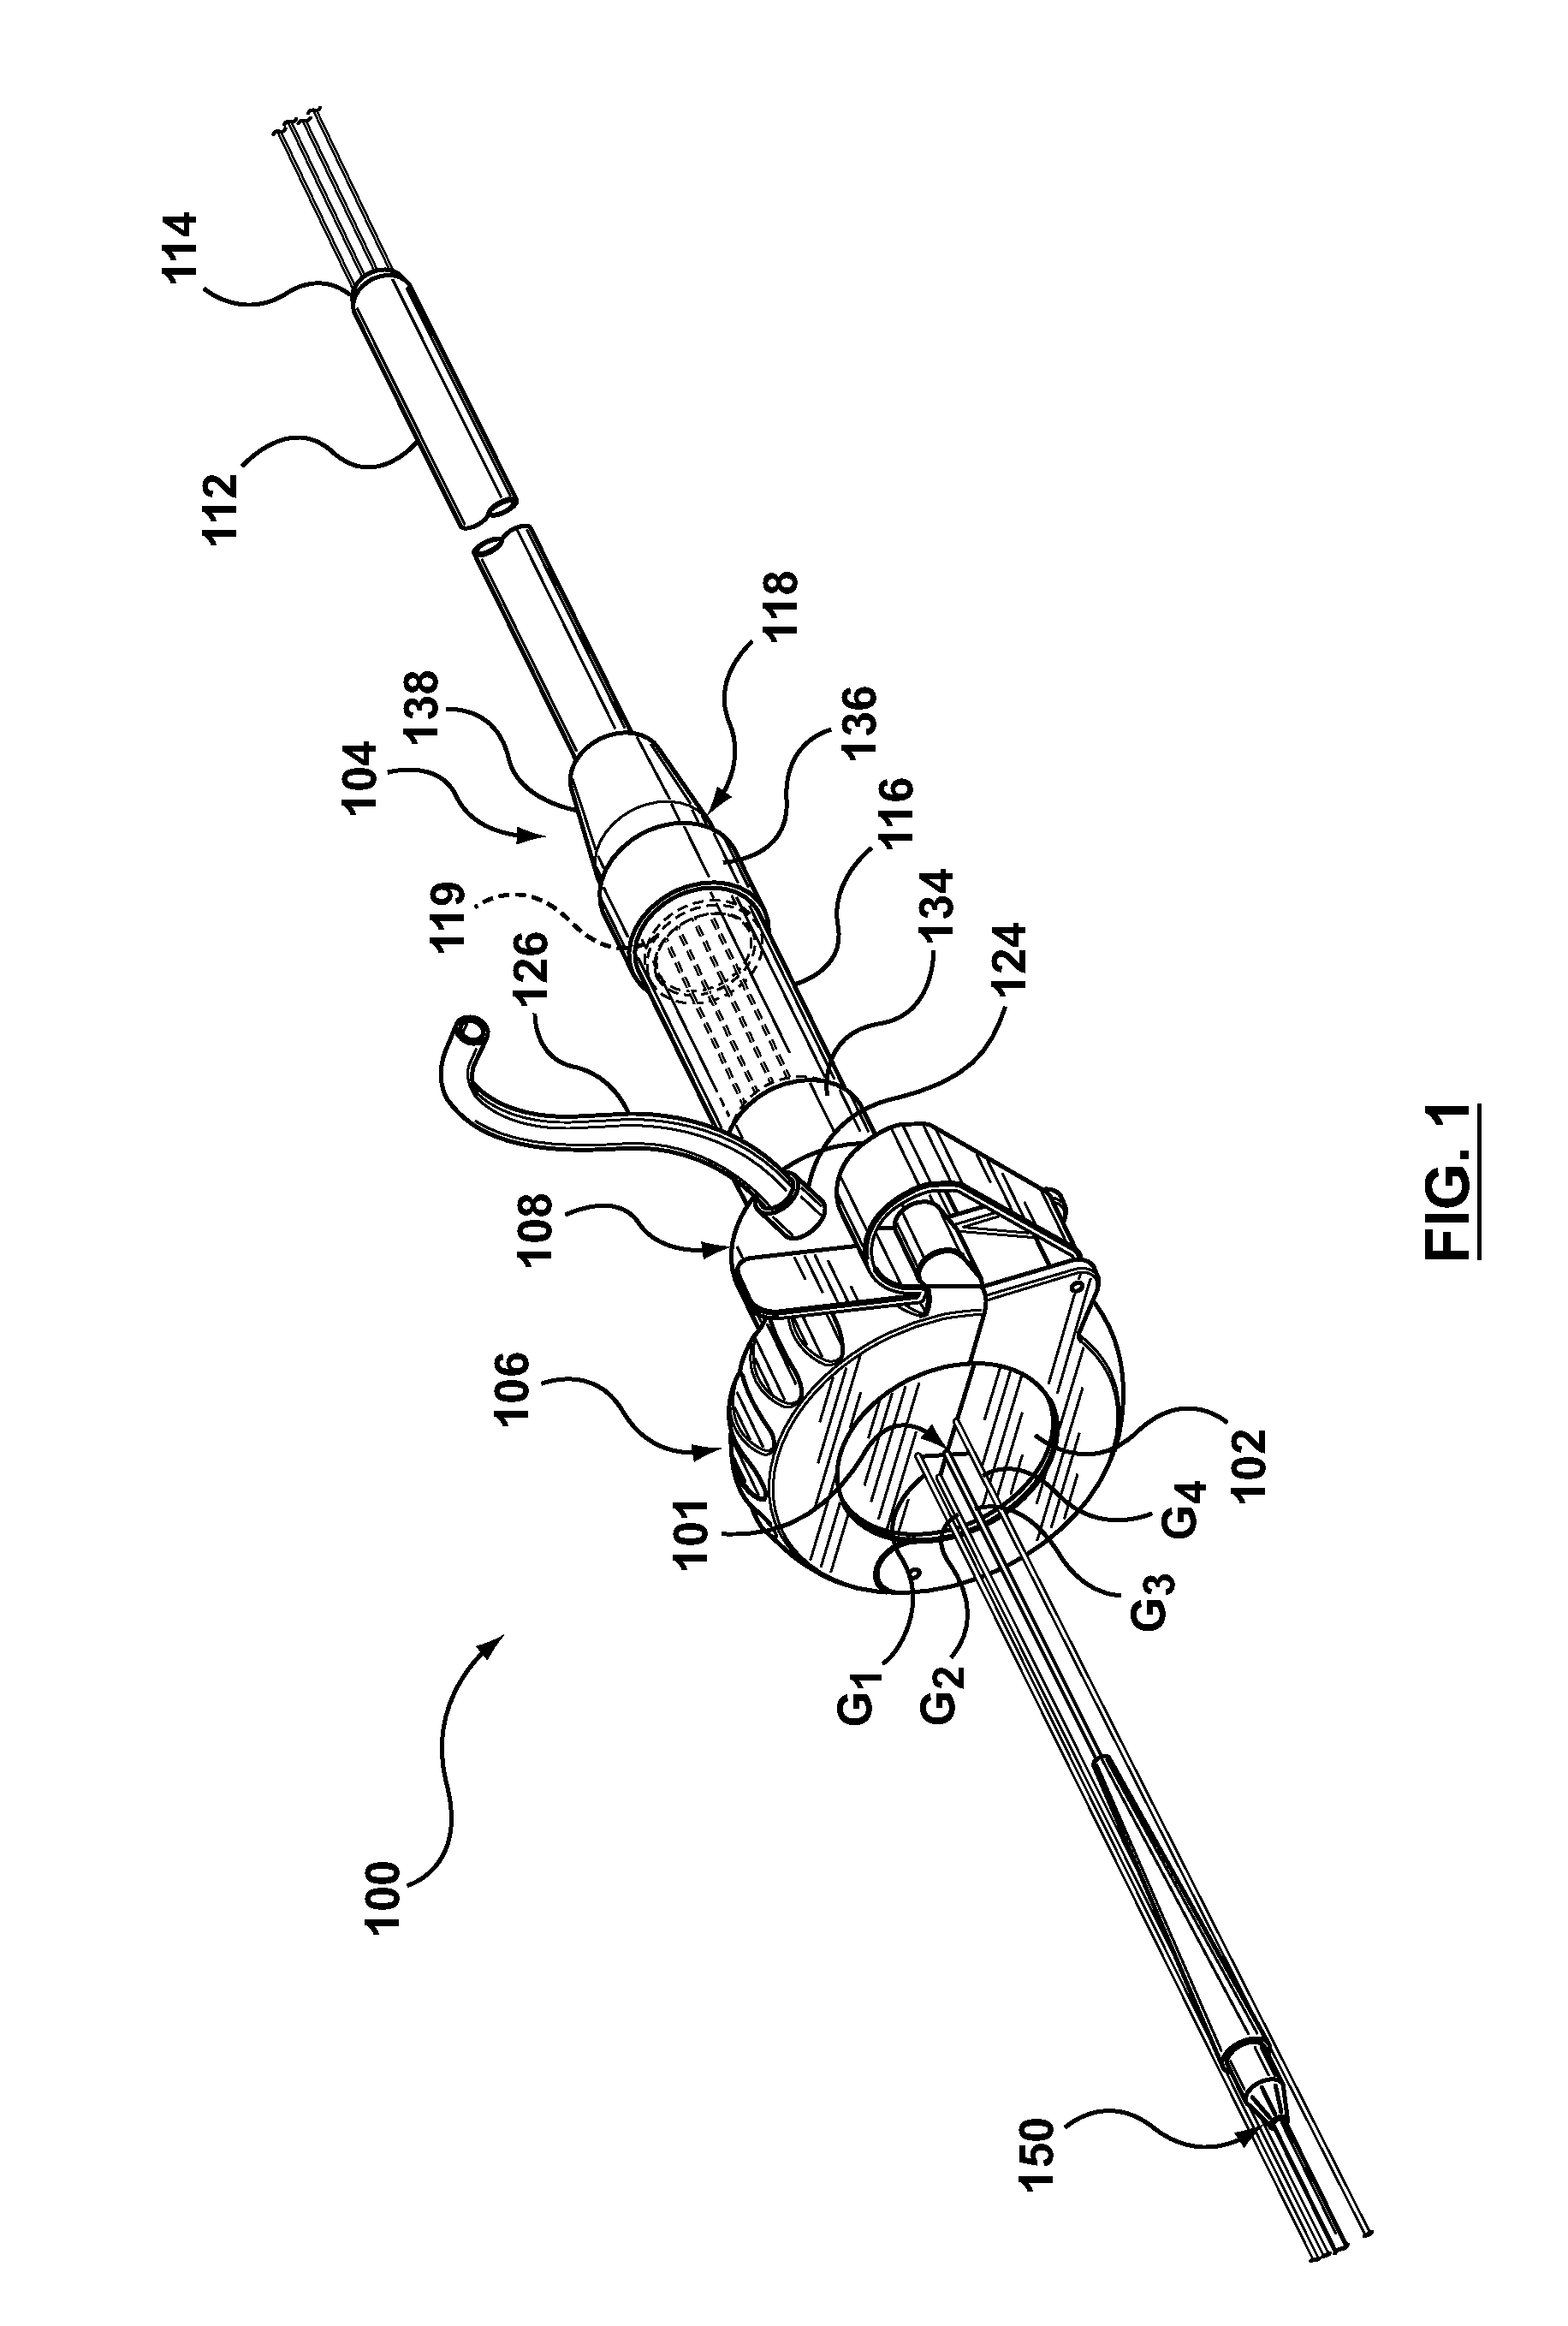 Sheath Introducer System with Exchangeable Hemostatic Valves